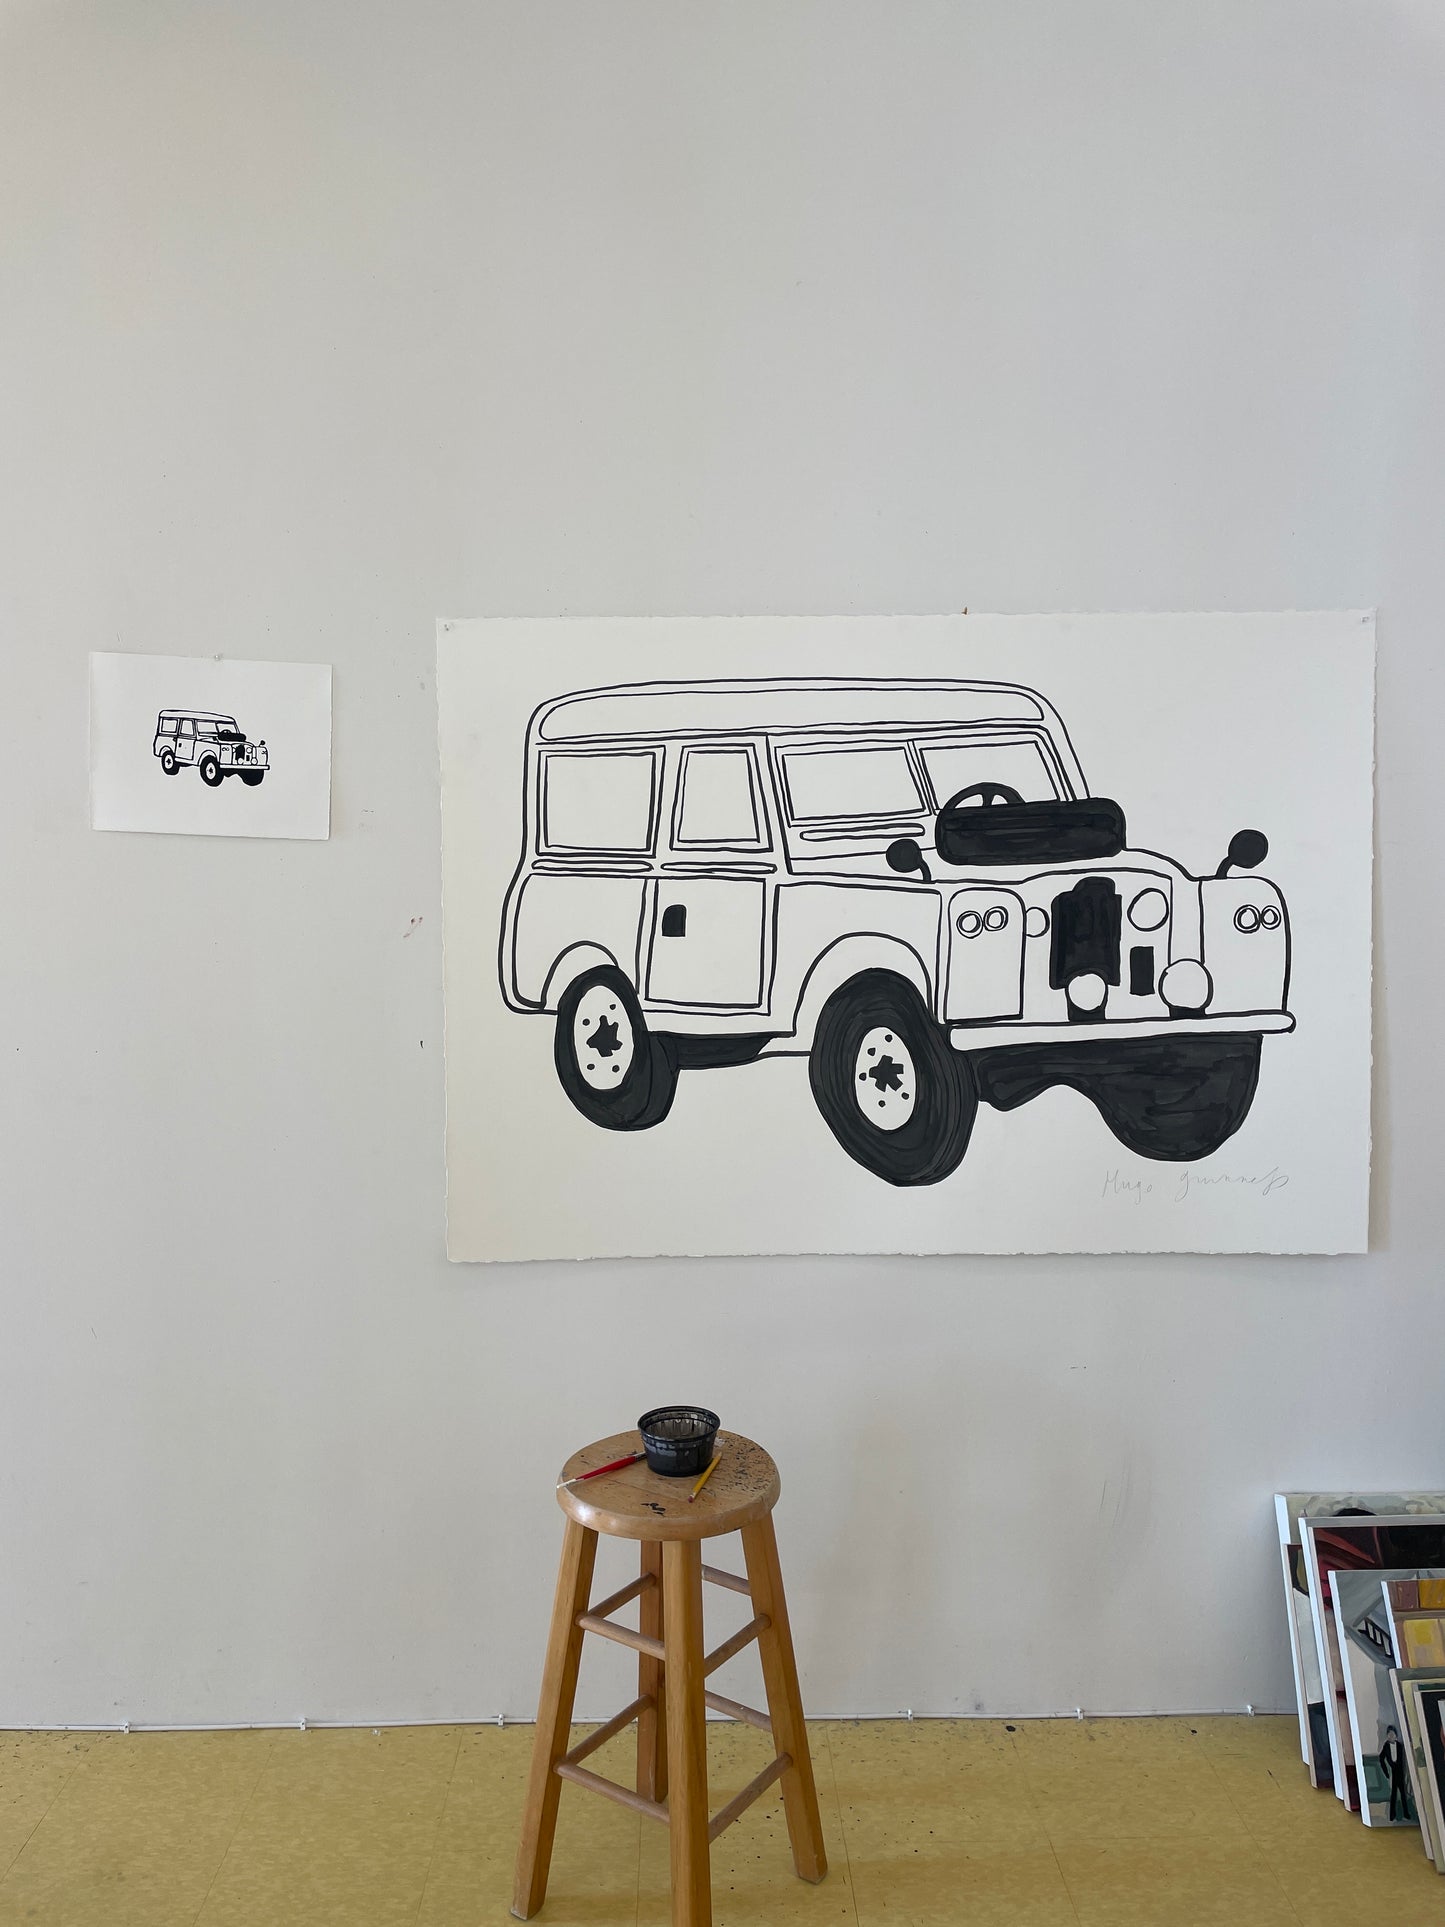 Large Land Rover Ink Drawing II